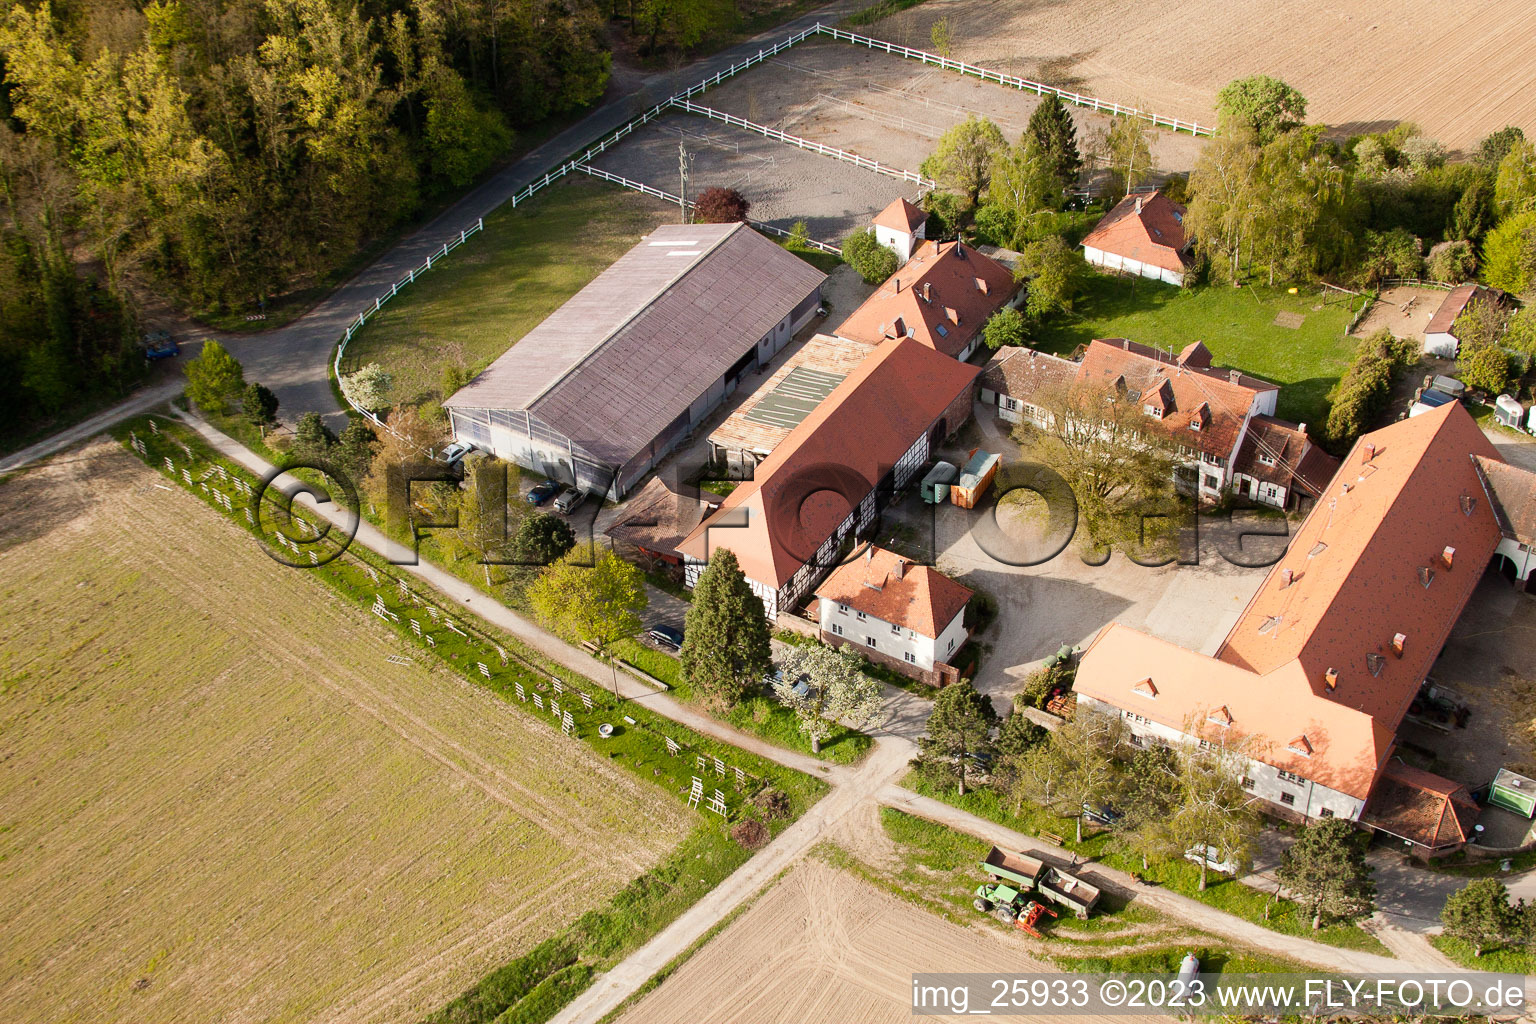 Rittnerthof in the district Durlach in Karlsruhe in the state Baden-Wuerttemberg, Germany viewn from the air